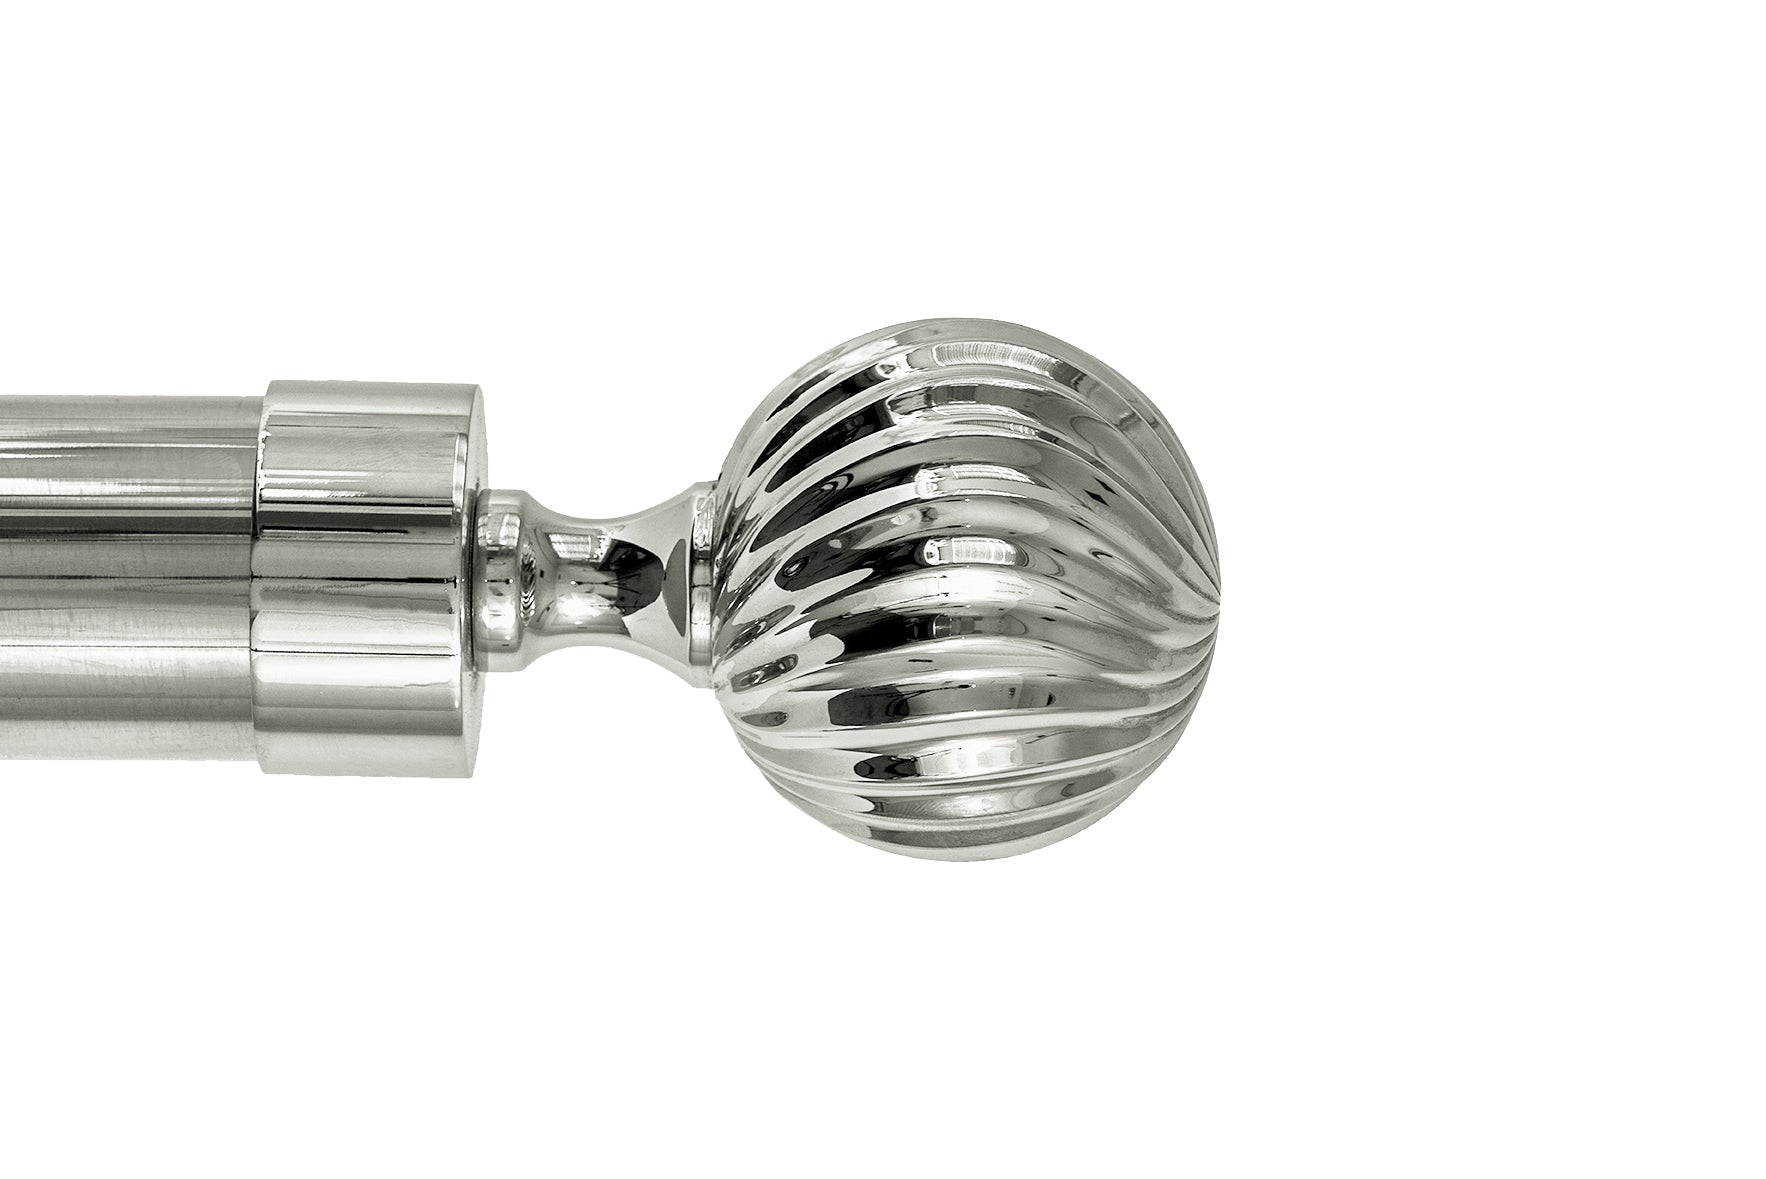 Tillys Twisted Ball Finial Curtain Pole Set in Polished Nickel